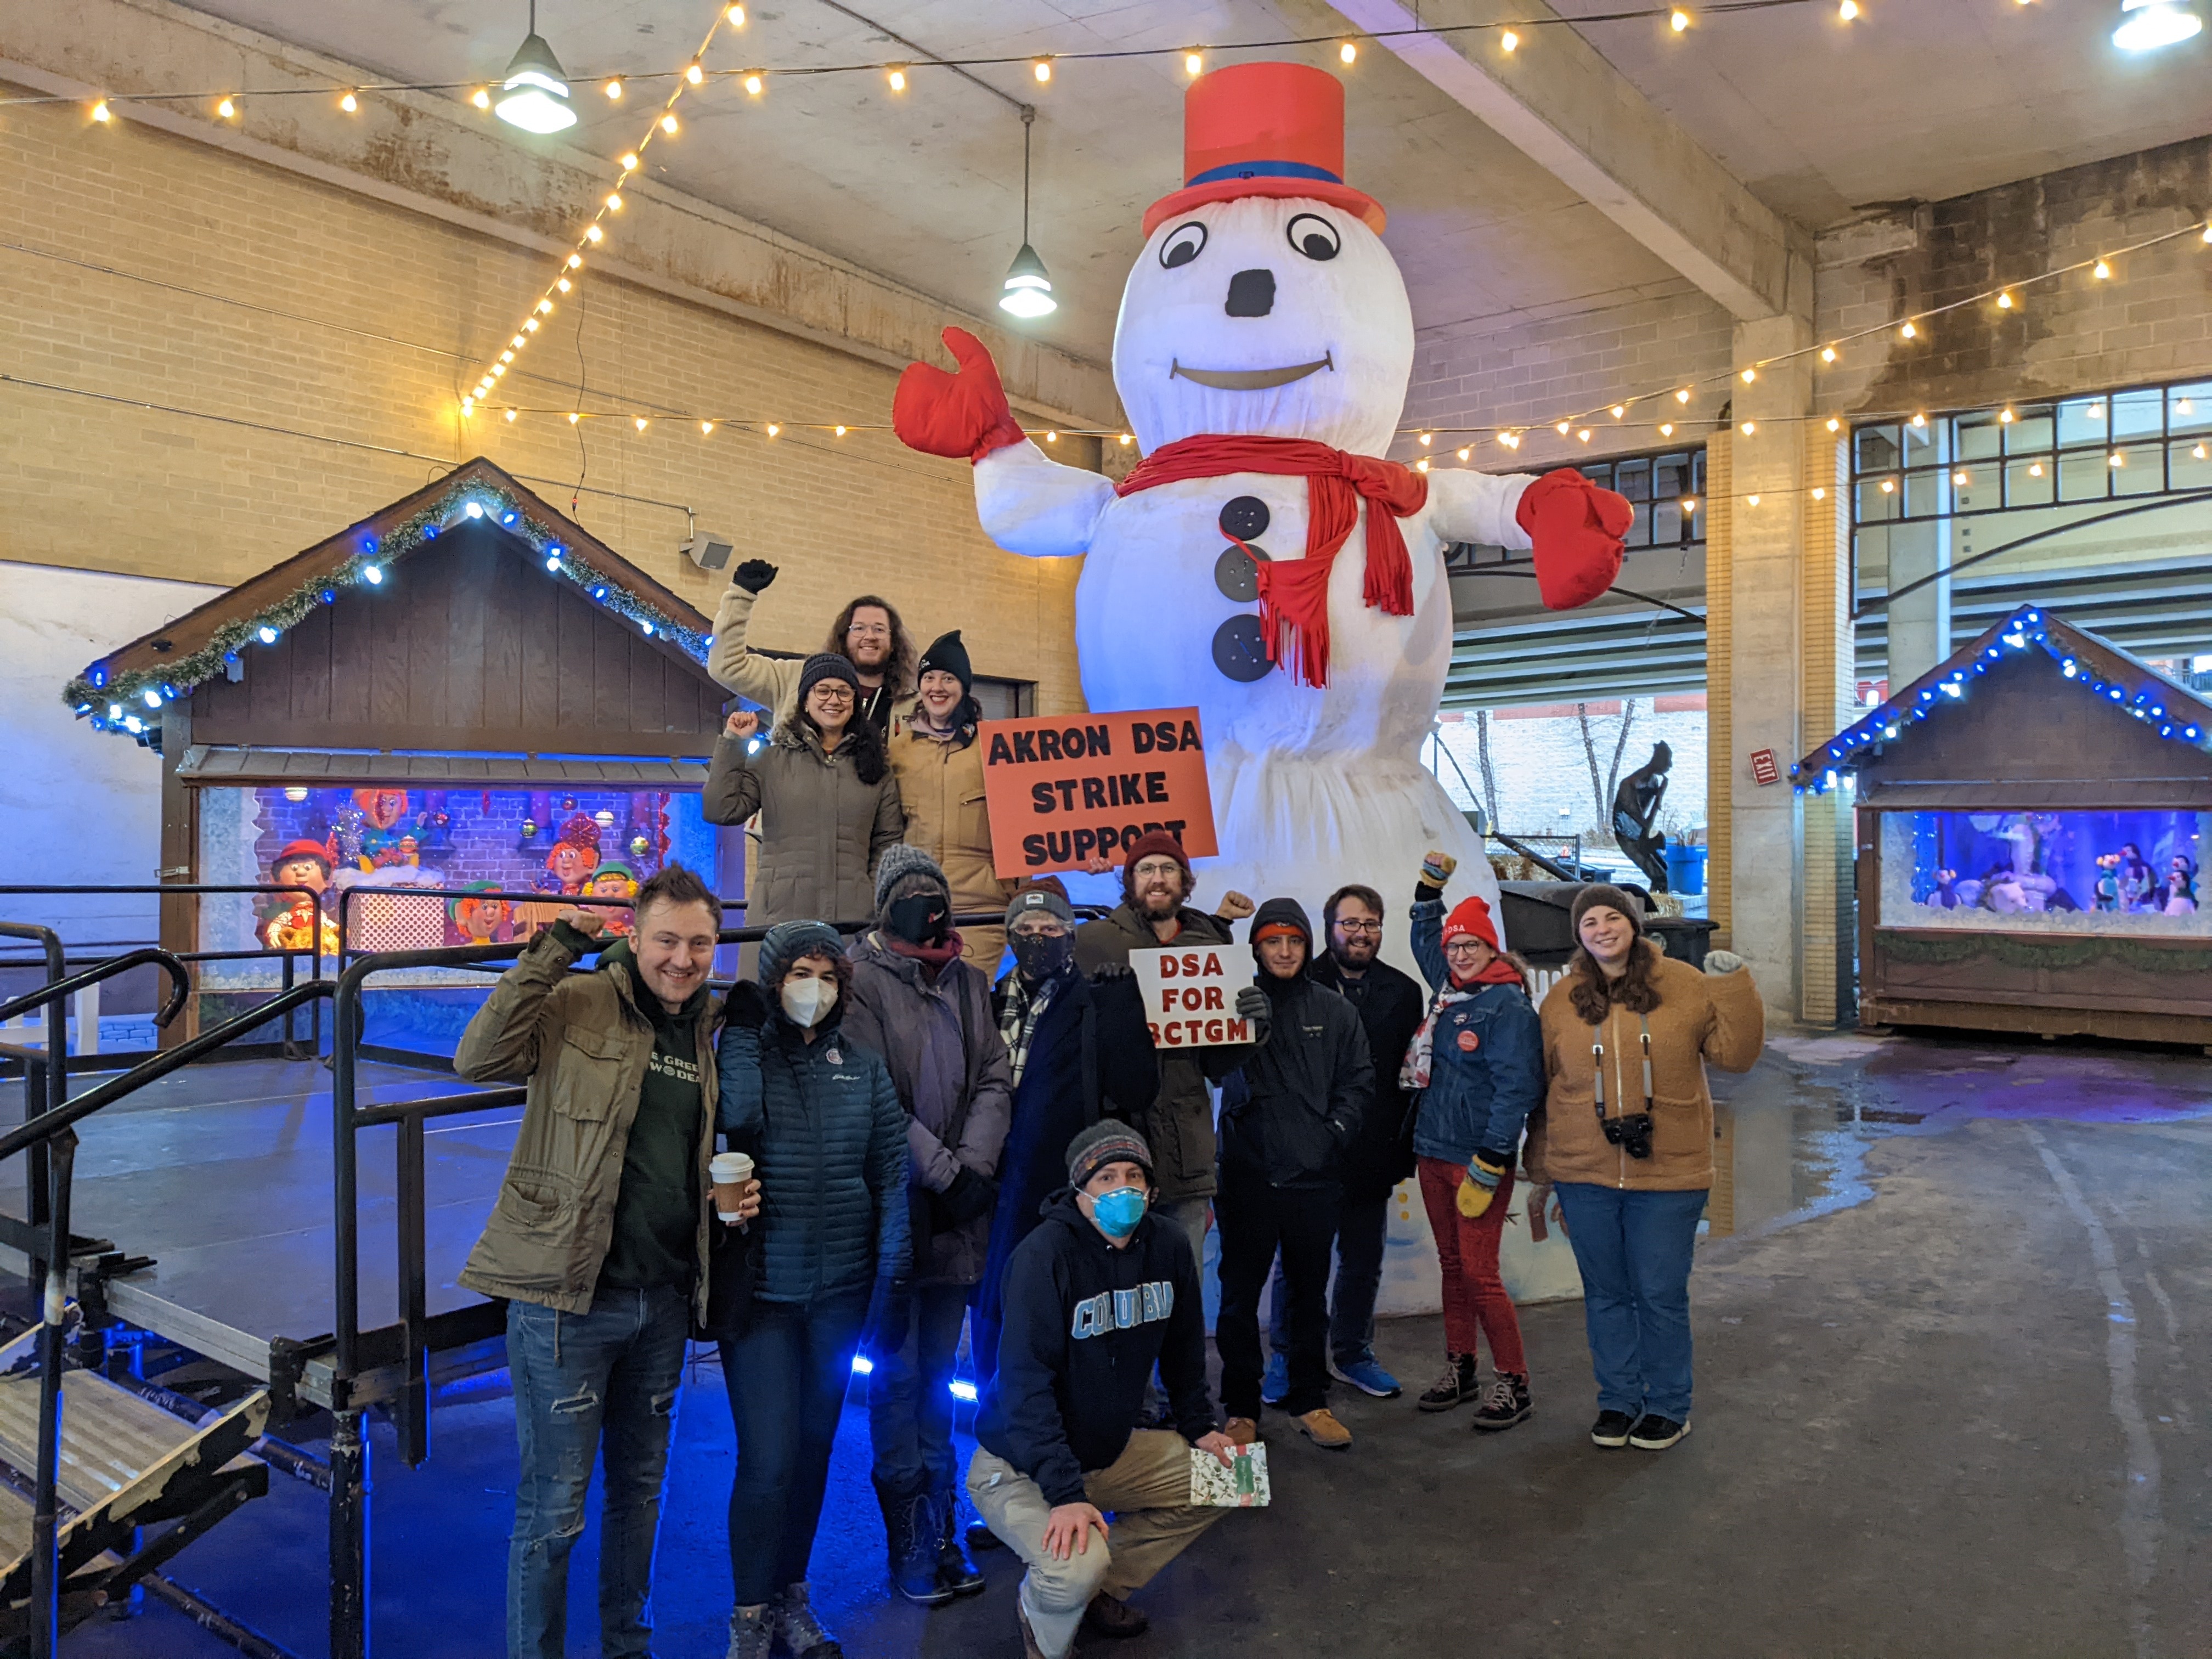 Members of Akron DSA wearing winter clothing stand in front of Archie the snowman holding a sign that says "Akron DSA Strike Support" in 2021